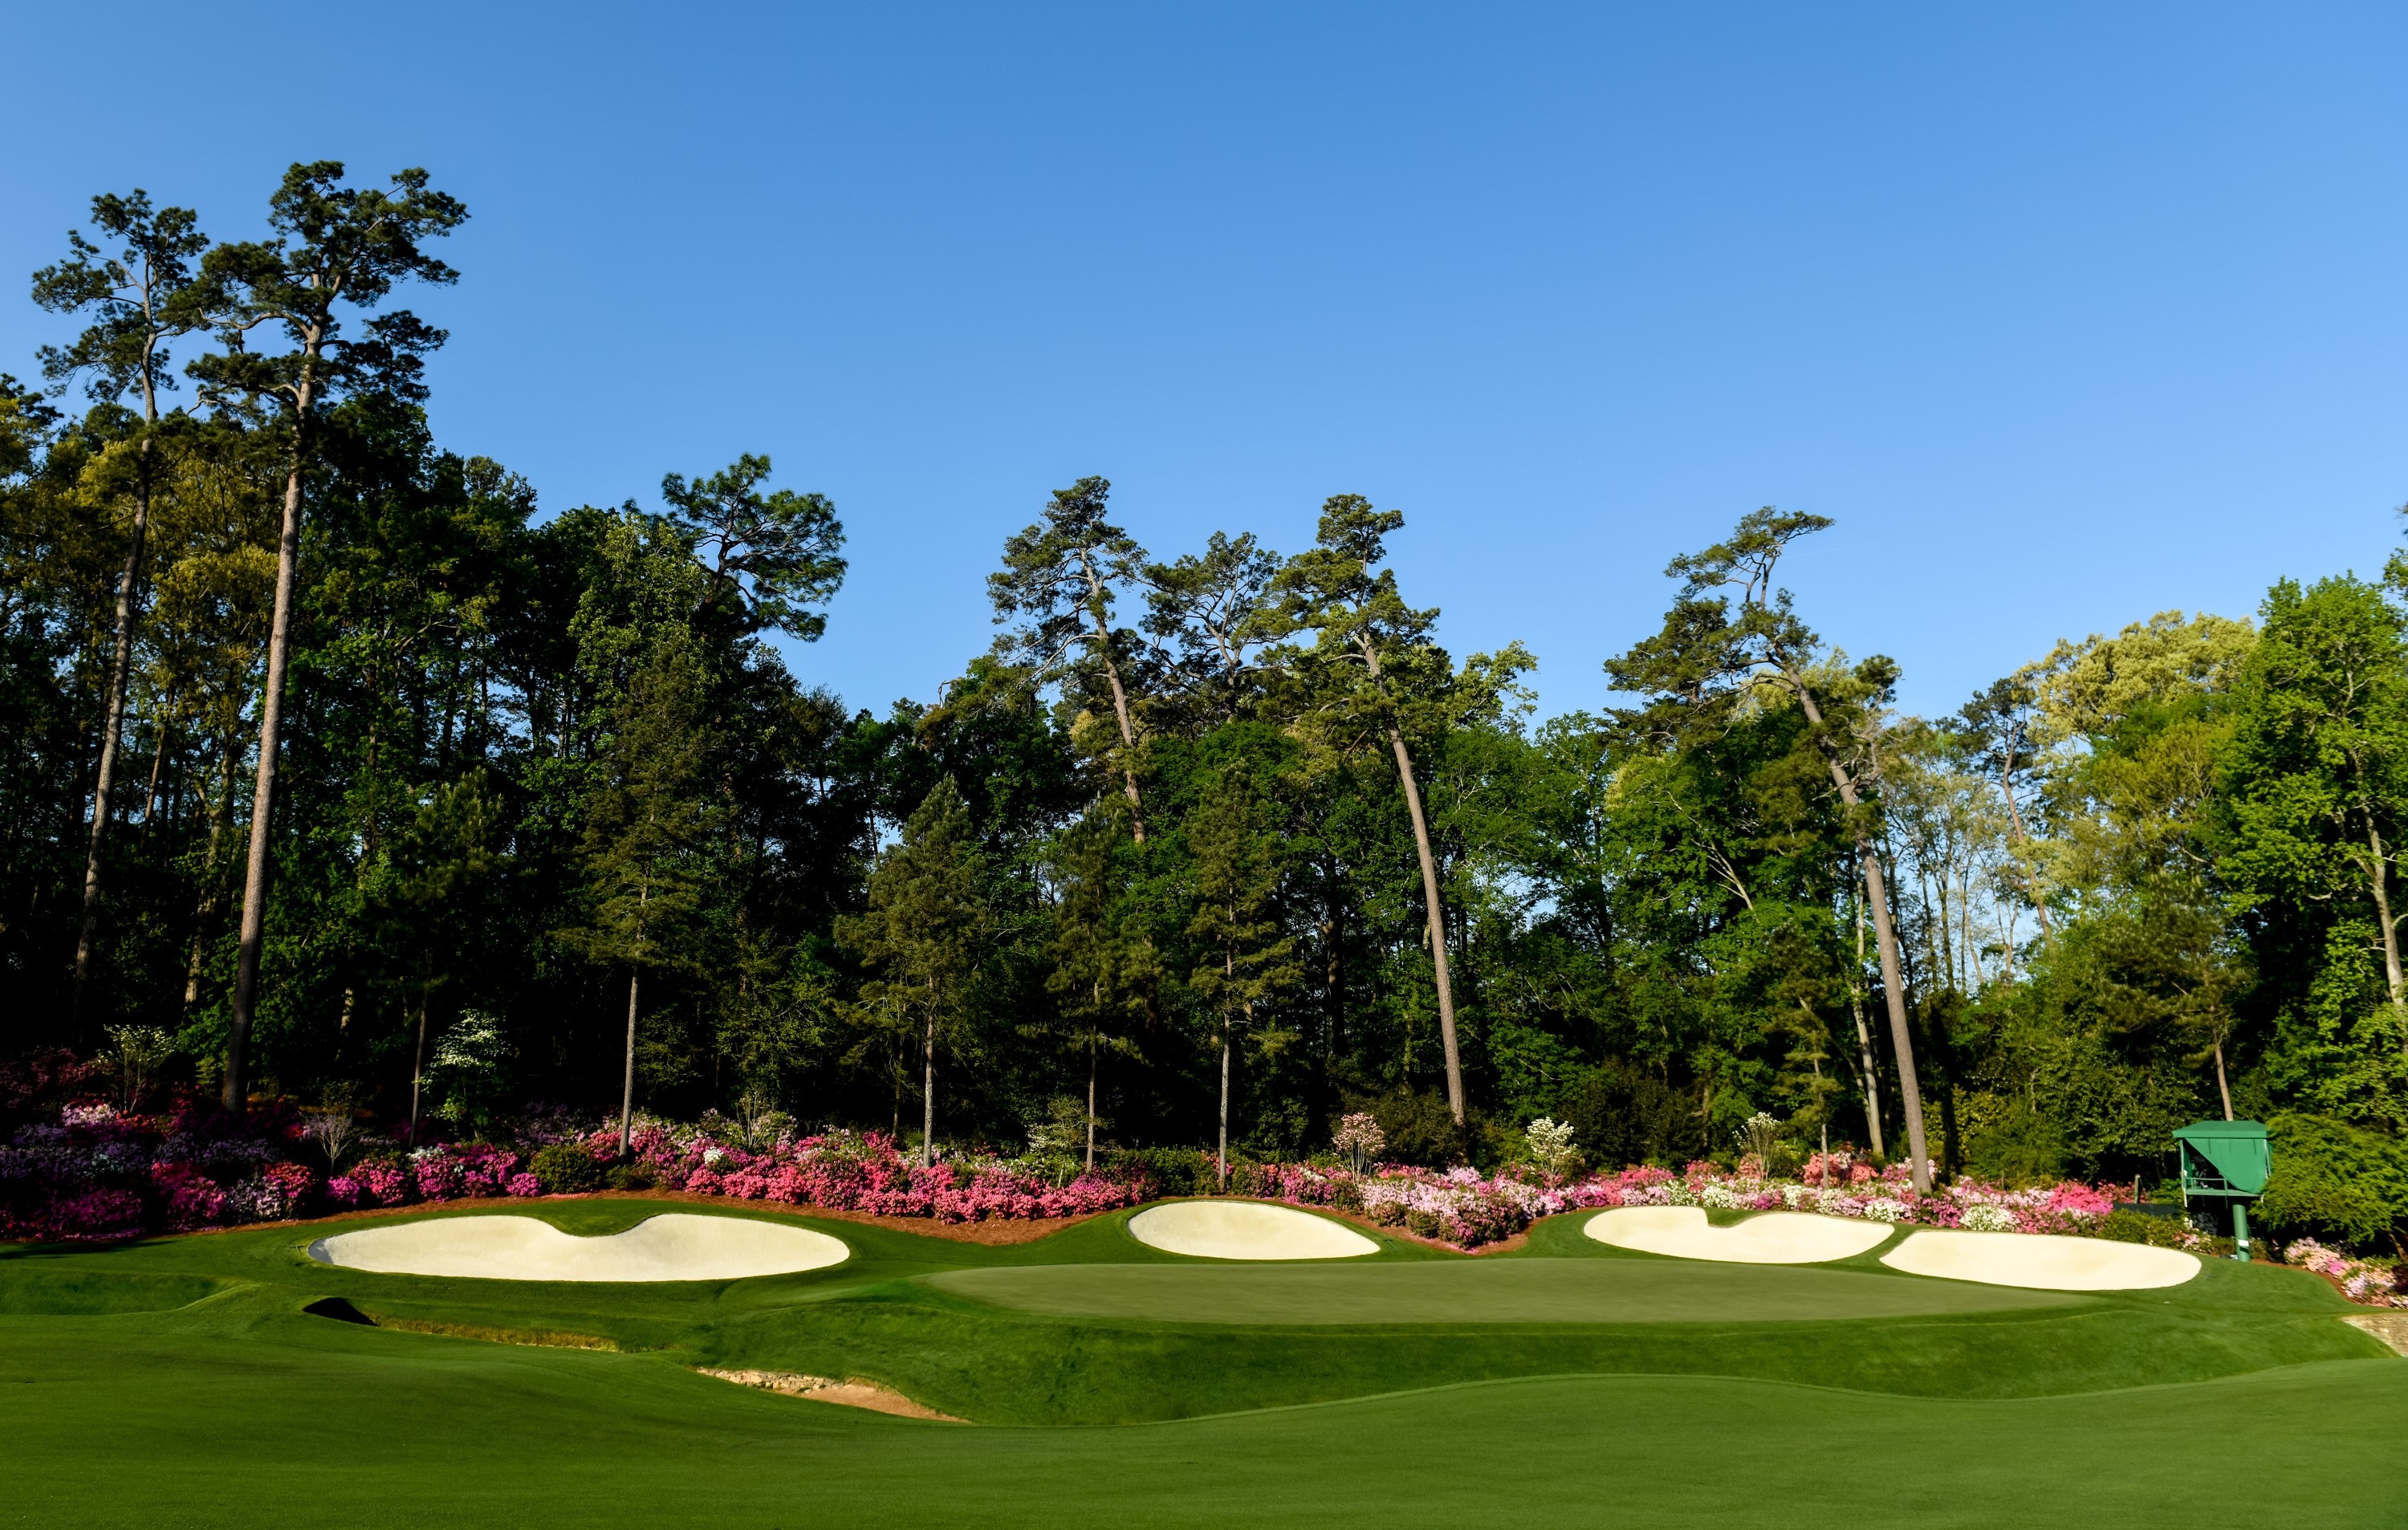 3000x1906 13's challenge has faded in recent years at Augusta National